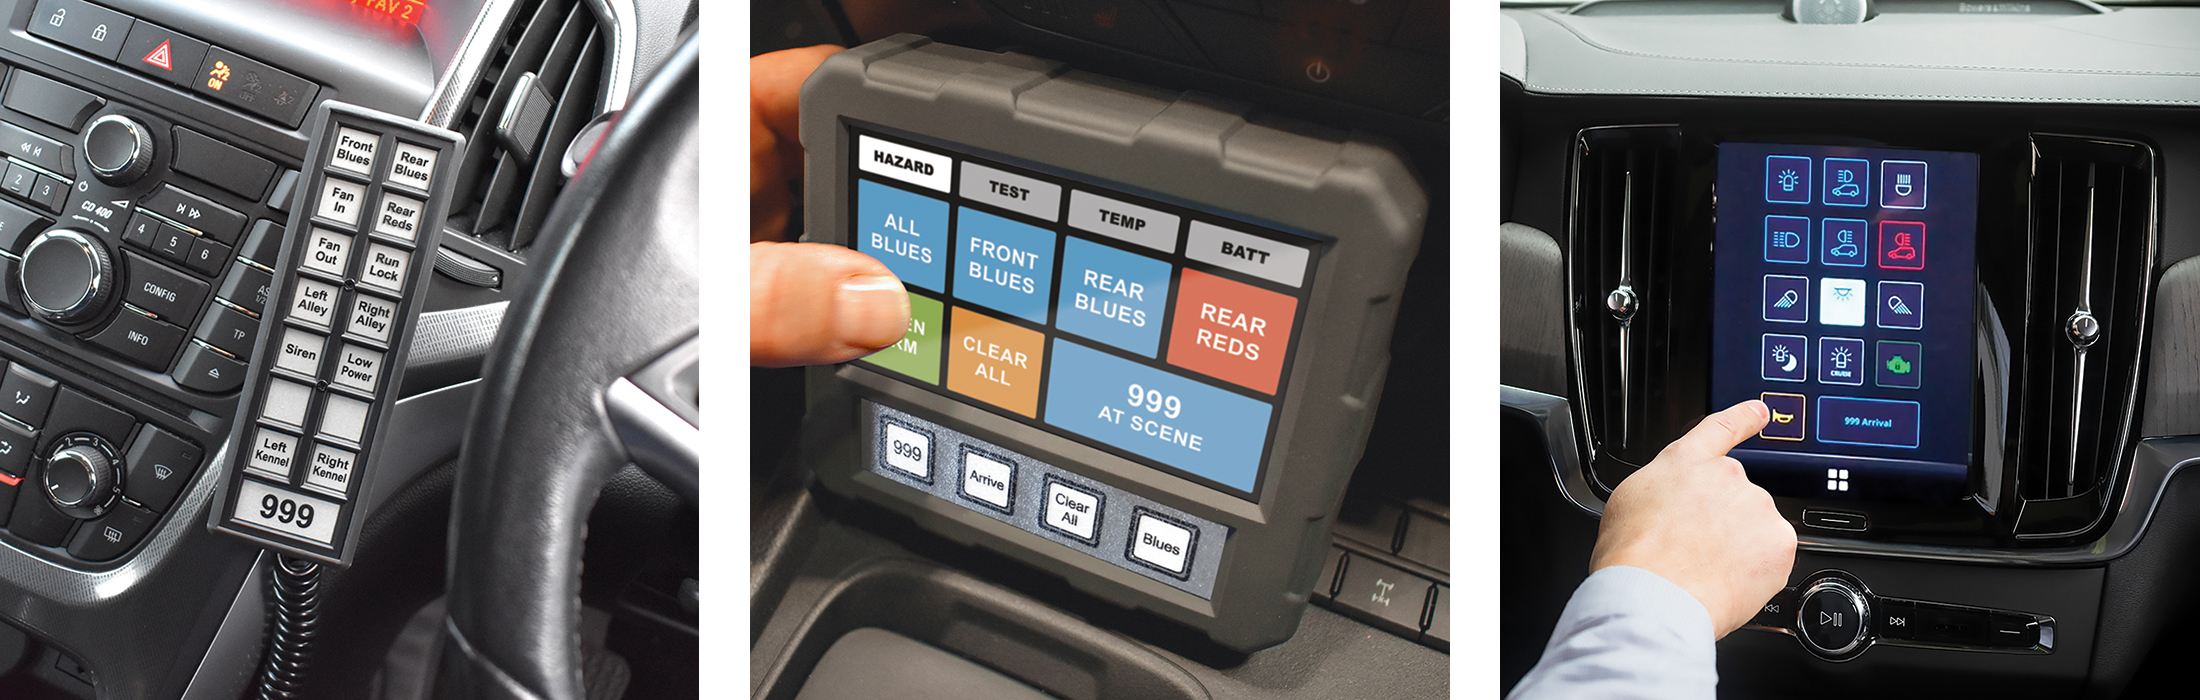 MCS-NX Interface Options Showing T-16 Handset, Touchscreen Controller and CARAT Switch System